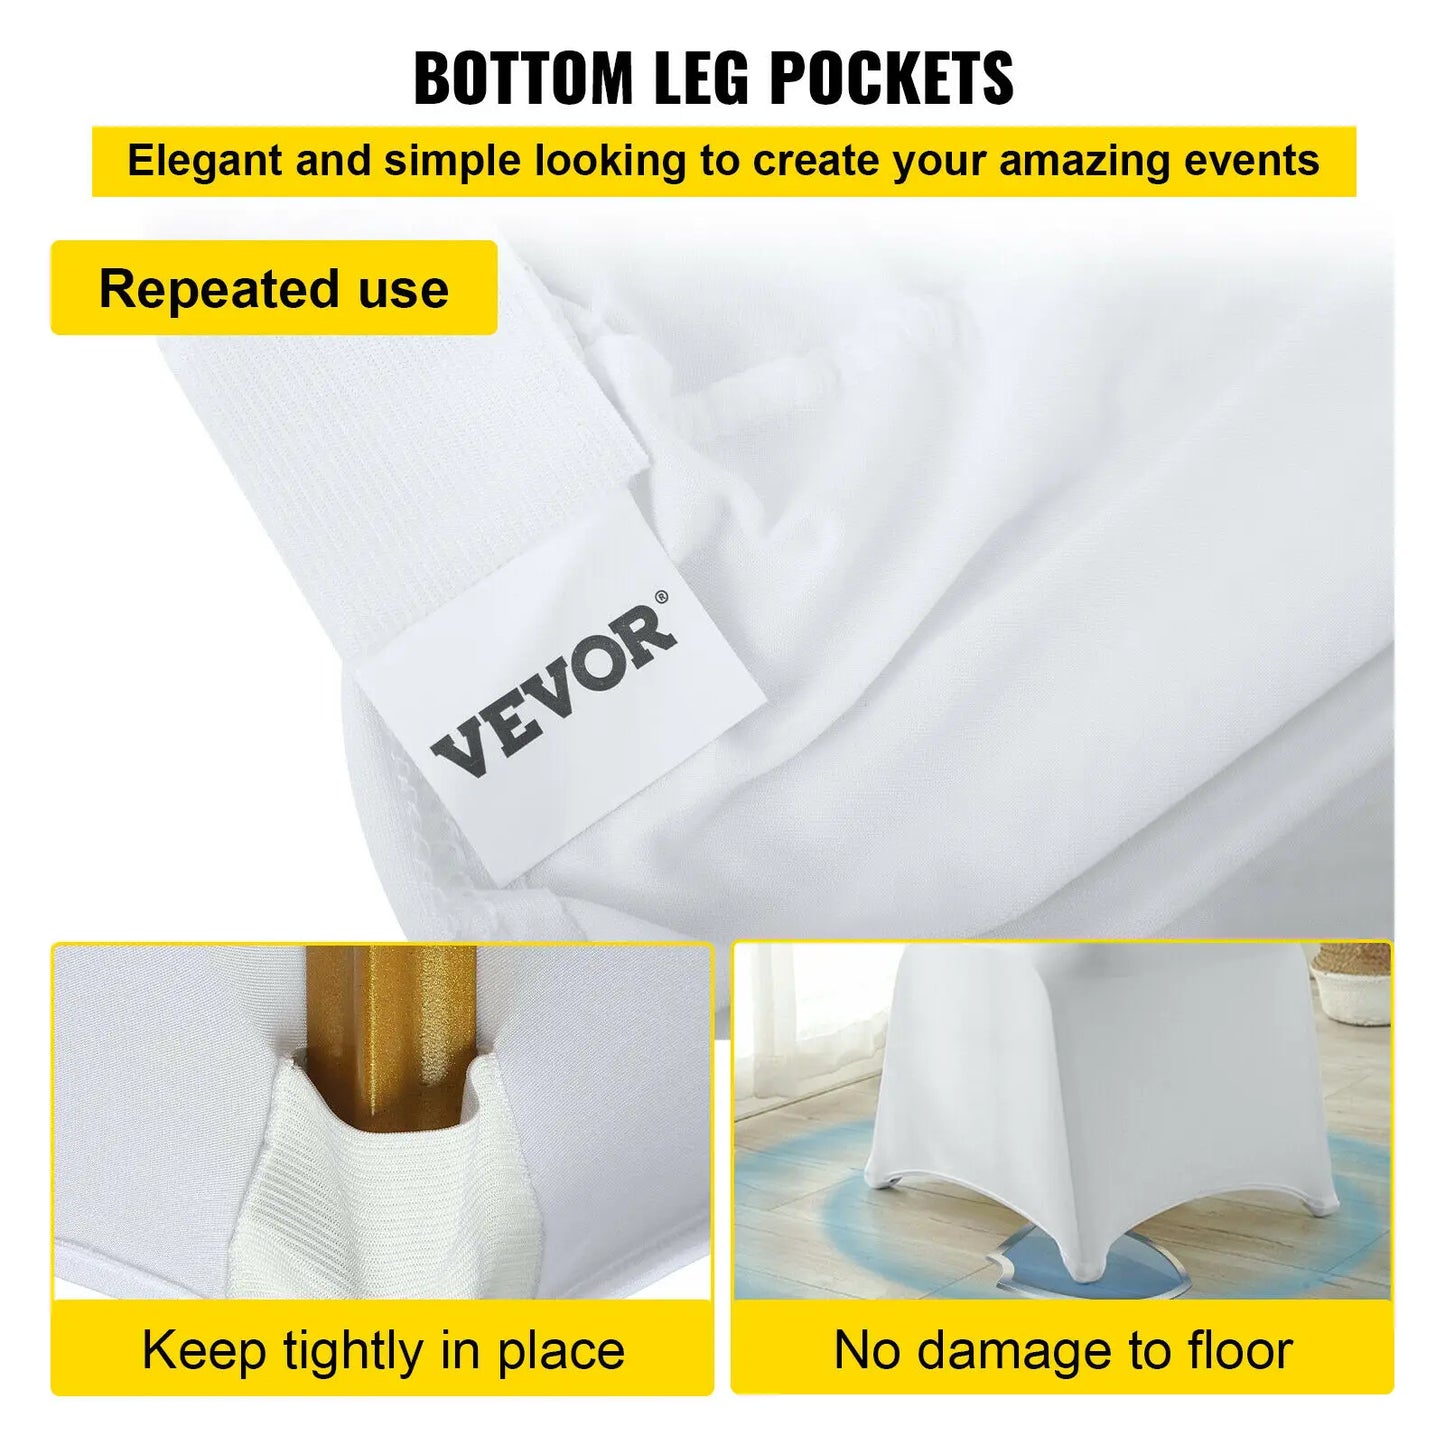 VEVOR 50 100Pcs Wedding Chair Covers Spandex Stretch Slipcover for Restaurant Banquet Hotel Dining Party Universal Chair Cover